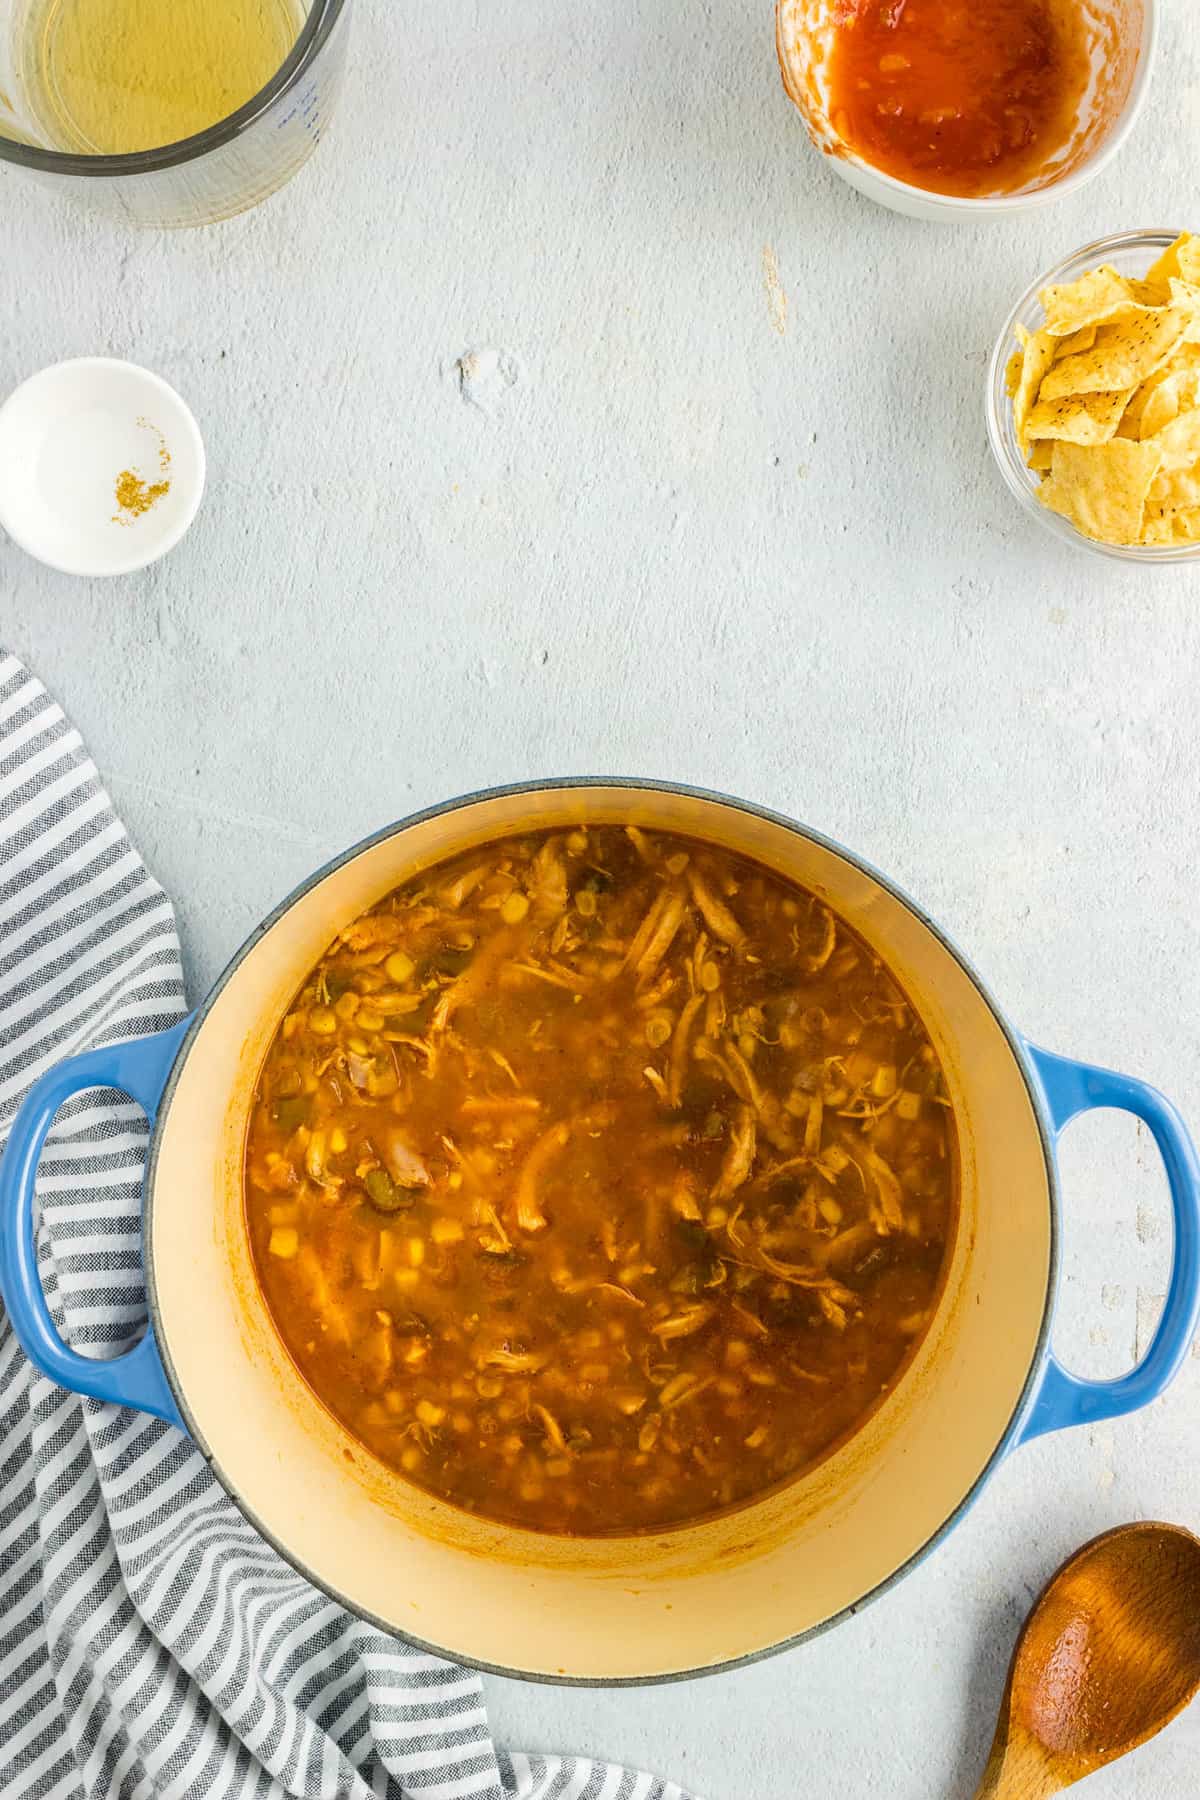 Easy Chicken Tortilla Soup Recipe in Pot Ready to Simmer for 20 Minutes